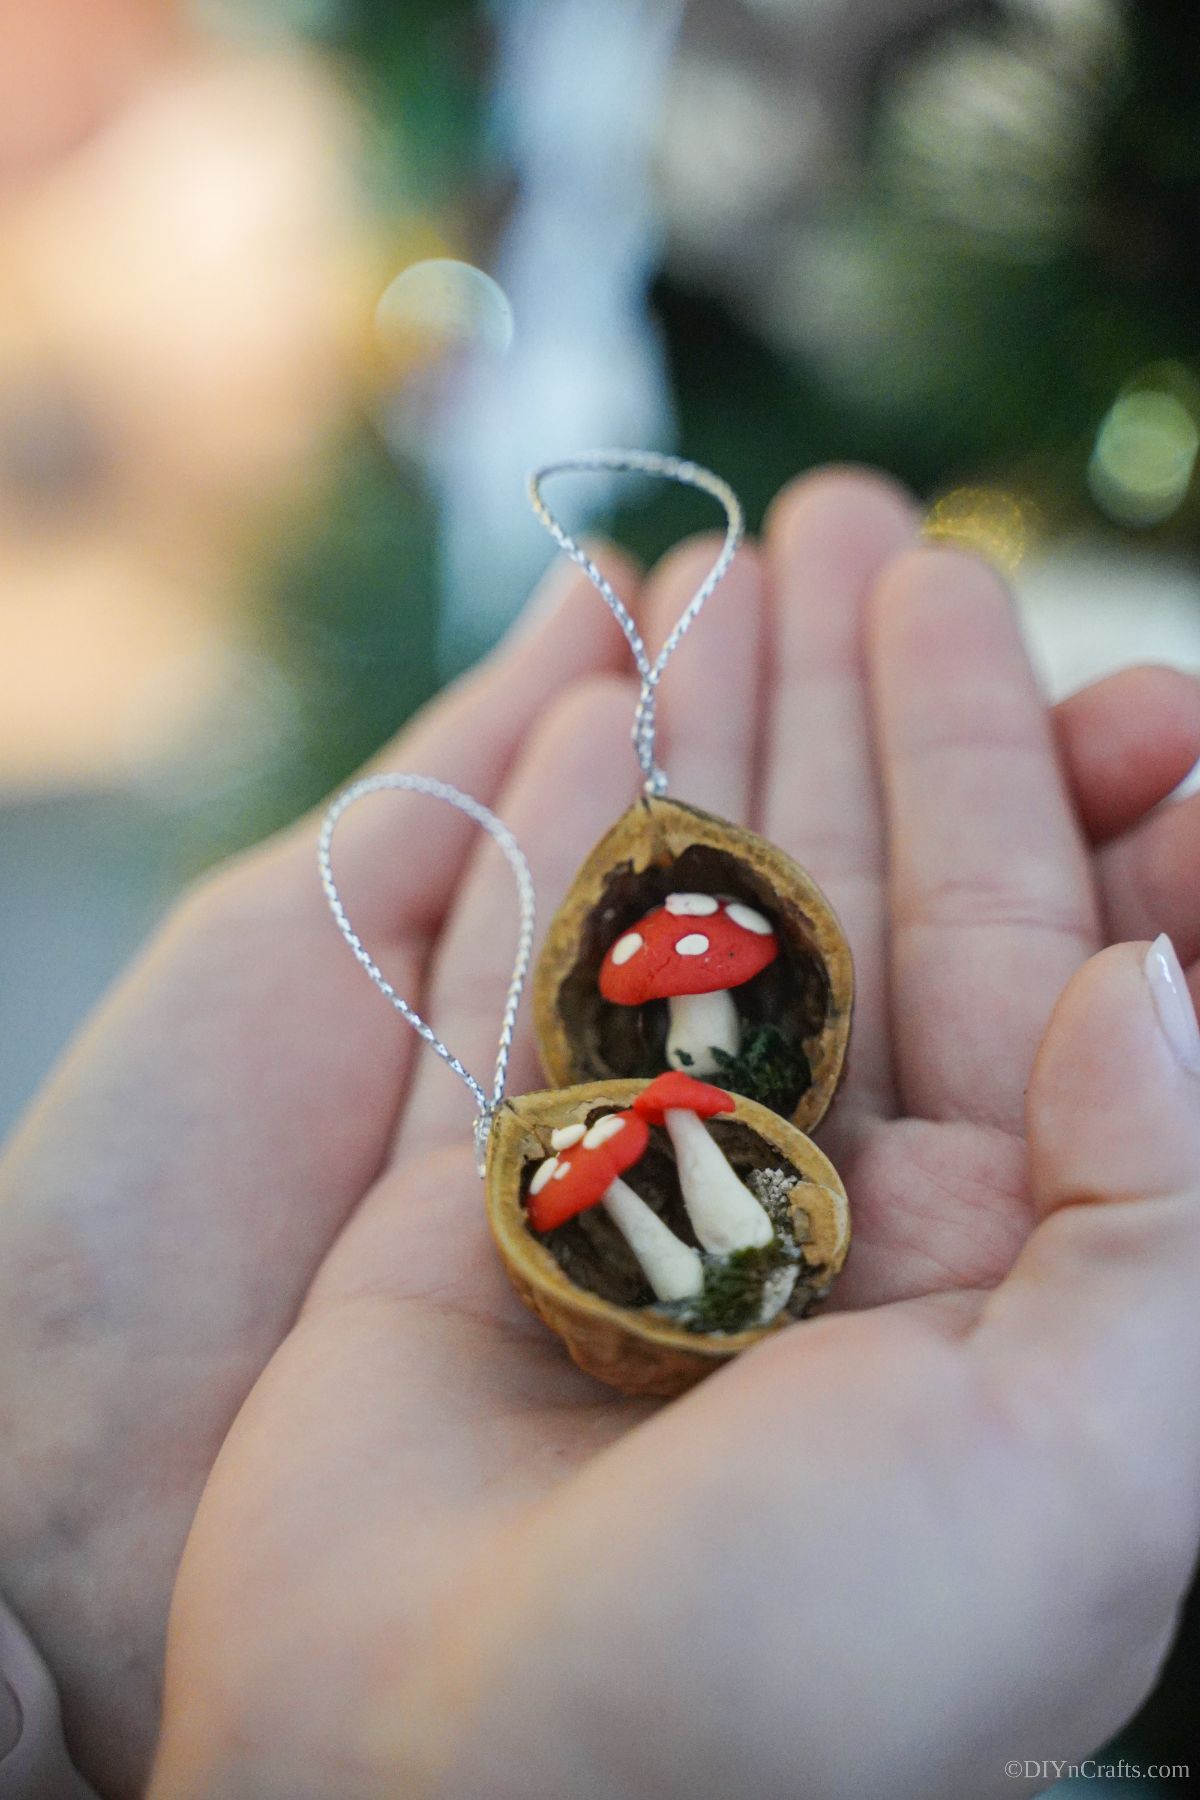 hands together holding two miniature mushroom ornaments